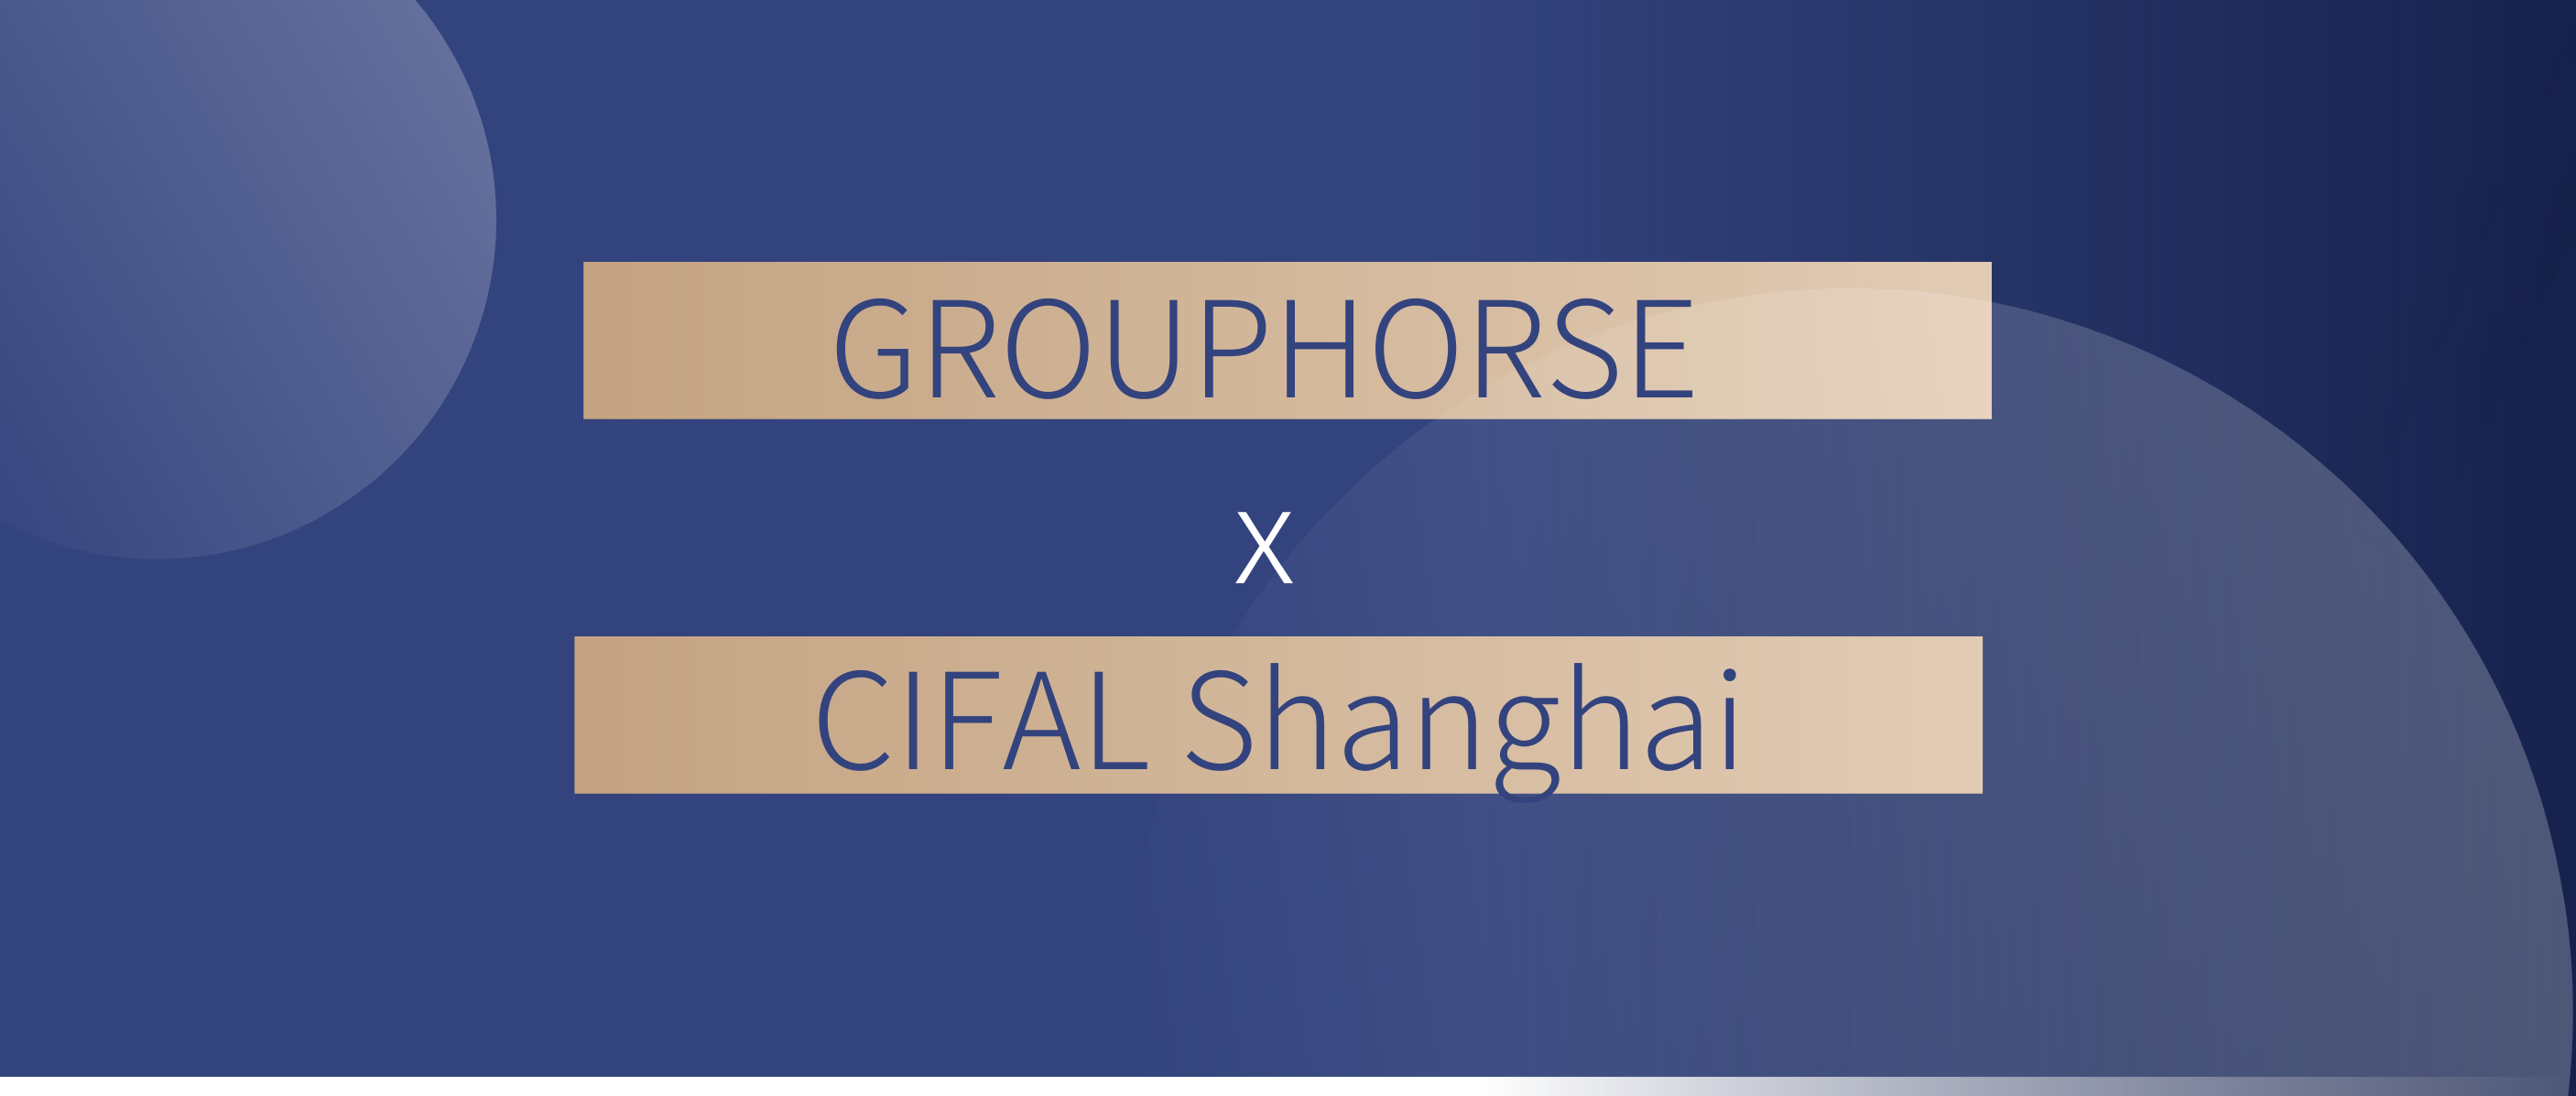 Fostering Multilingual Talents and Promoting Sustainable Development: Cooperation agreement signed by Grouphorse Group and CIFAL Shanghai